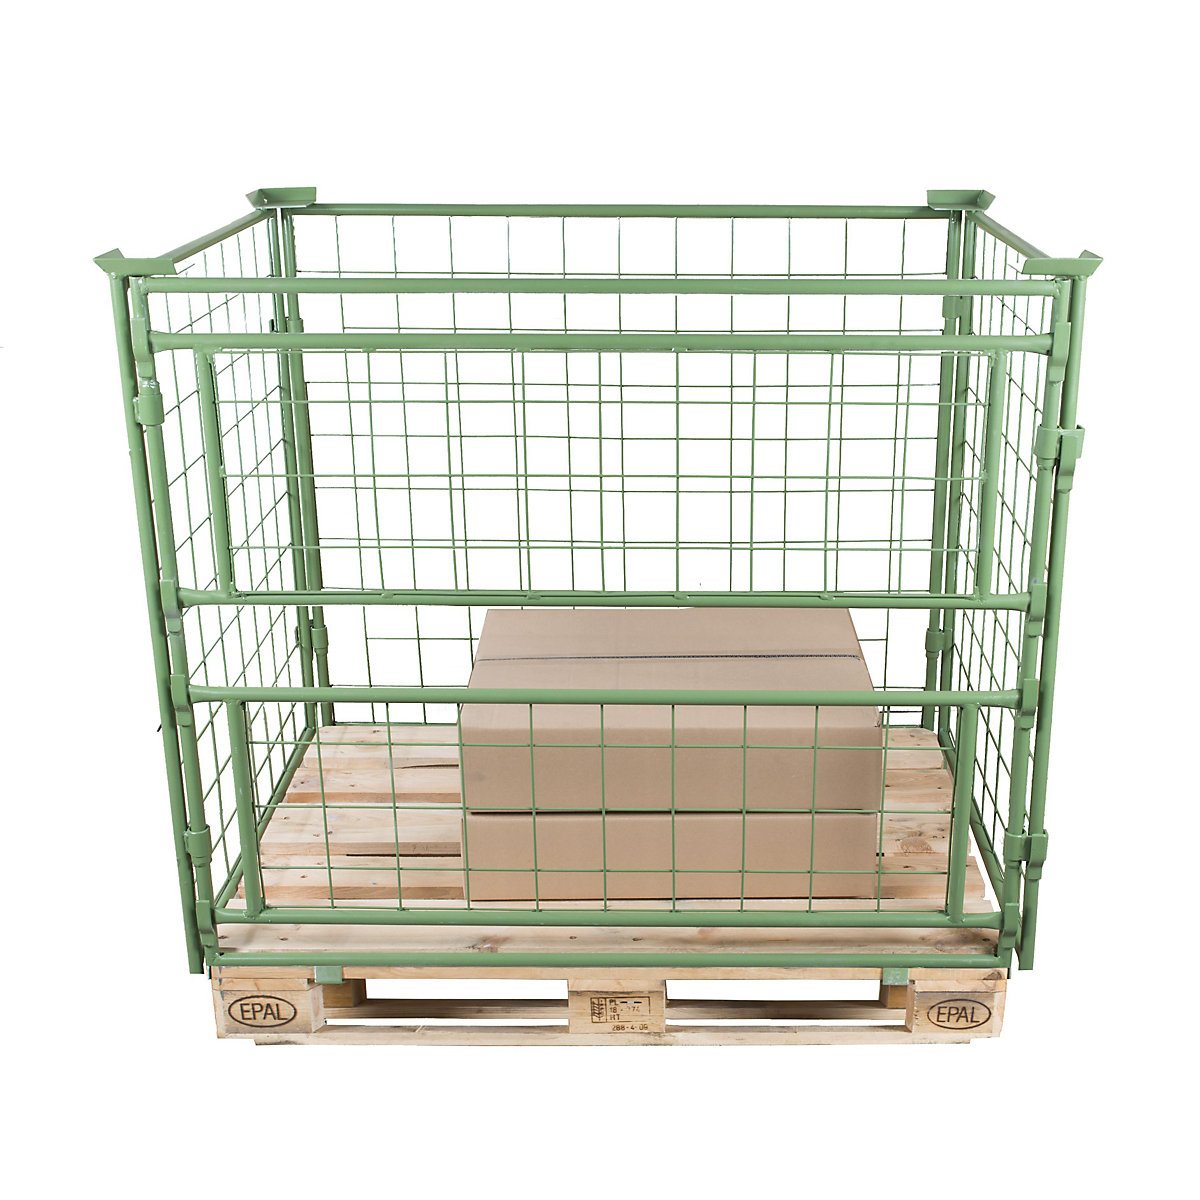 Pallet frame, effective height 1200 mm, for stacking, WxL 800 x 1200 mm, 1 long side with 2 parts, removable